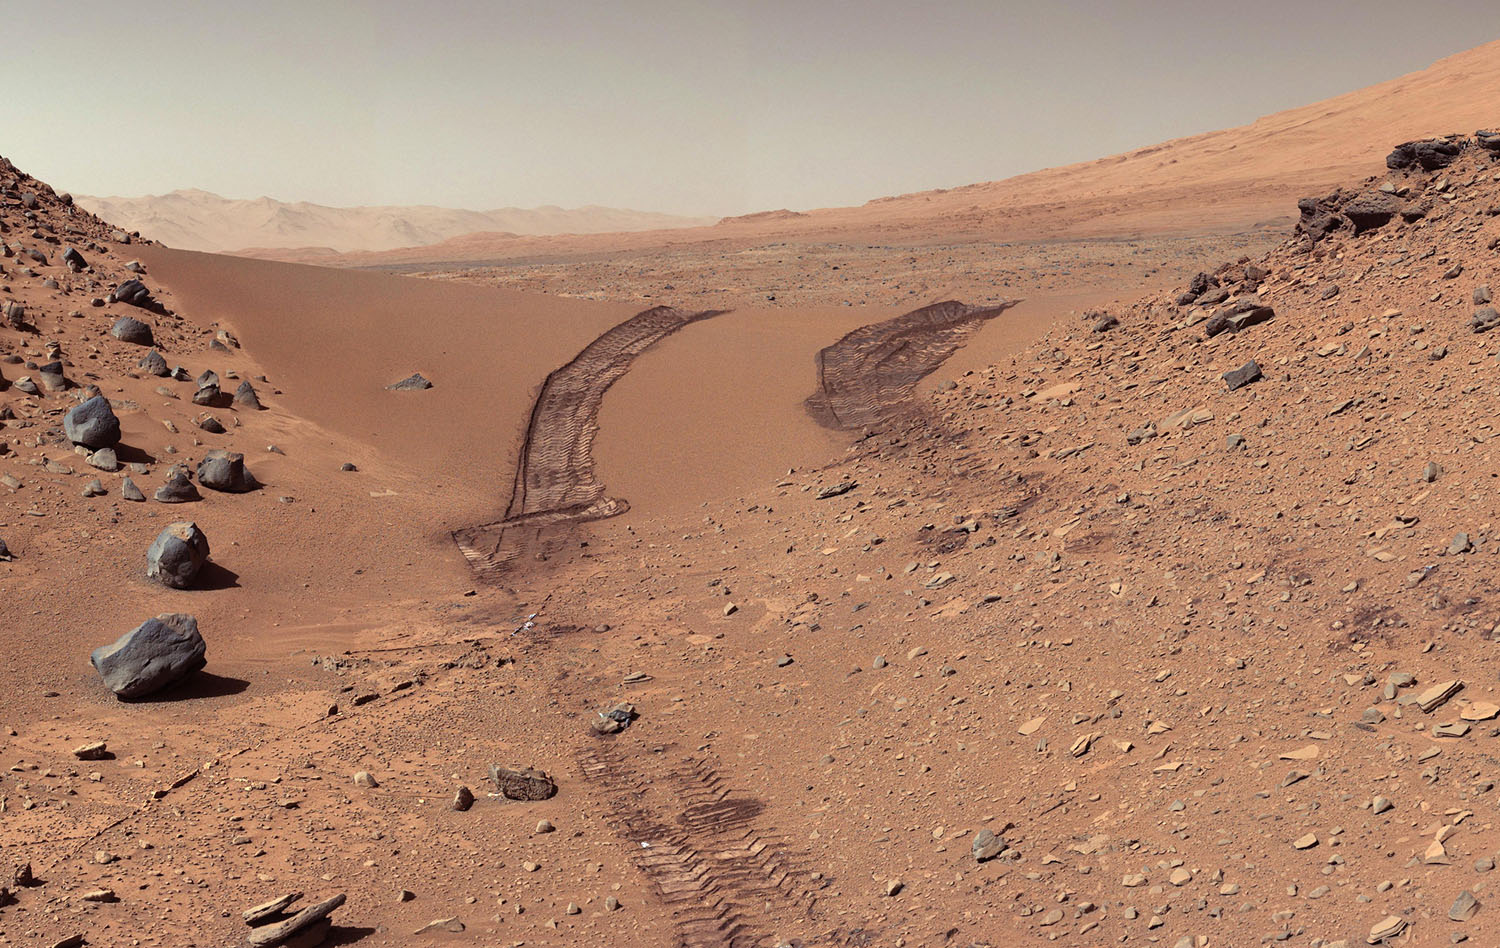 This look back at a dune that NASA's Curiosity Mars rover drove across was taken by the rover's Mast Camera (Mastcam) during the 538th Martian day, or sol, of Curiosity's work on Mars (Feb. 9, 2014). The rover had driven over the dune three days earlier. For scale, the distance between the parallel wheel tracks is about 9 feet (2.7 meters). The dune is about 3 feet (1 meter) tall in the middle of its span across an opening called "Dingo Gap." This view is looking eastward. (NASA/JPL-Caltech/MSSS)